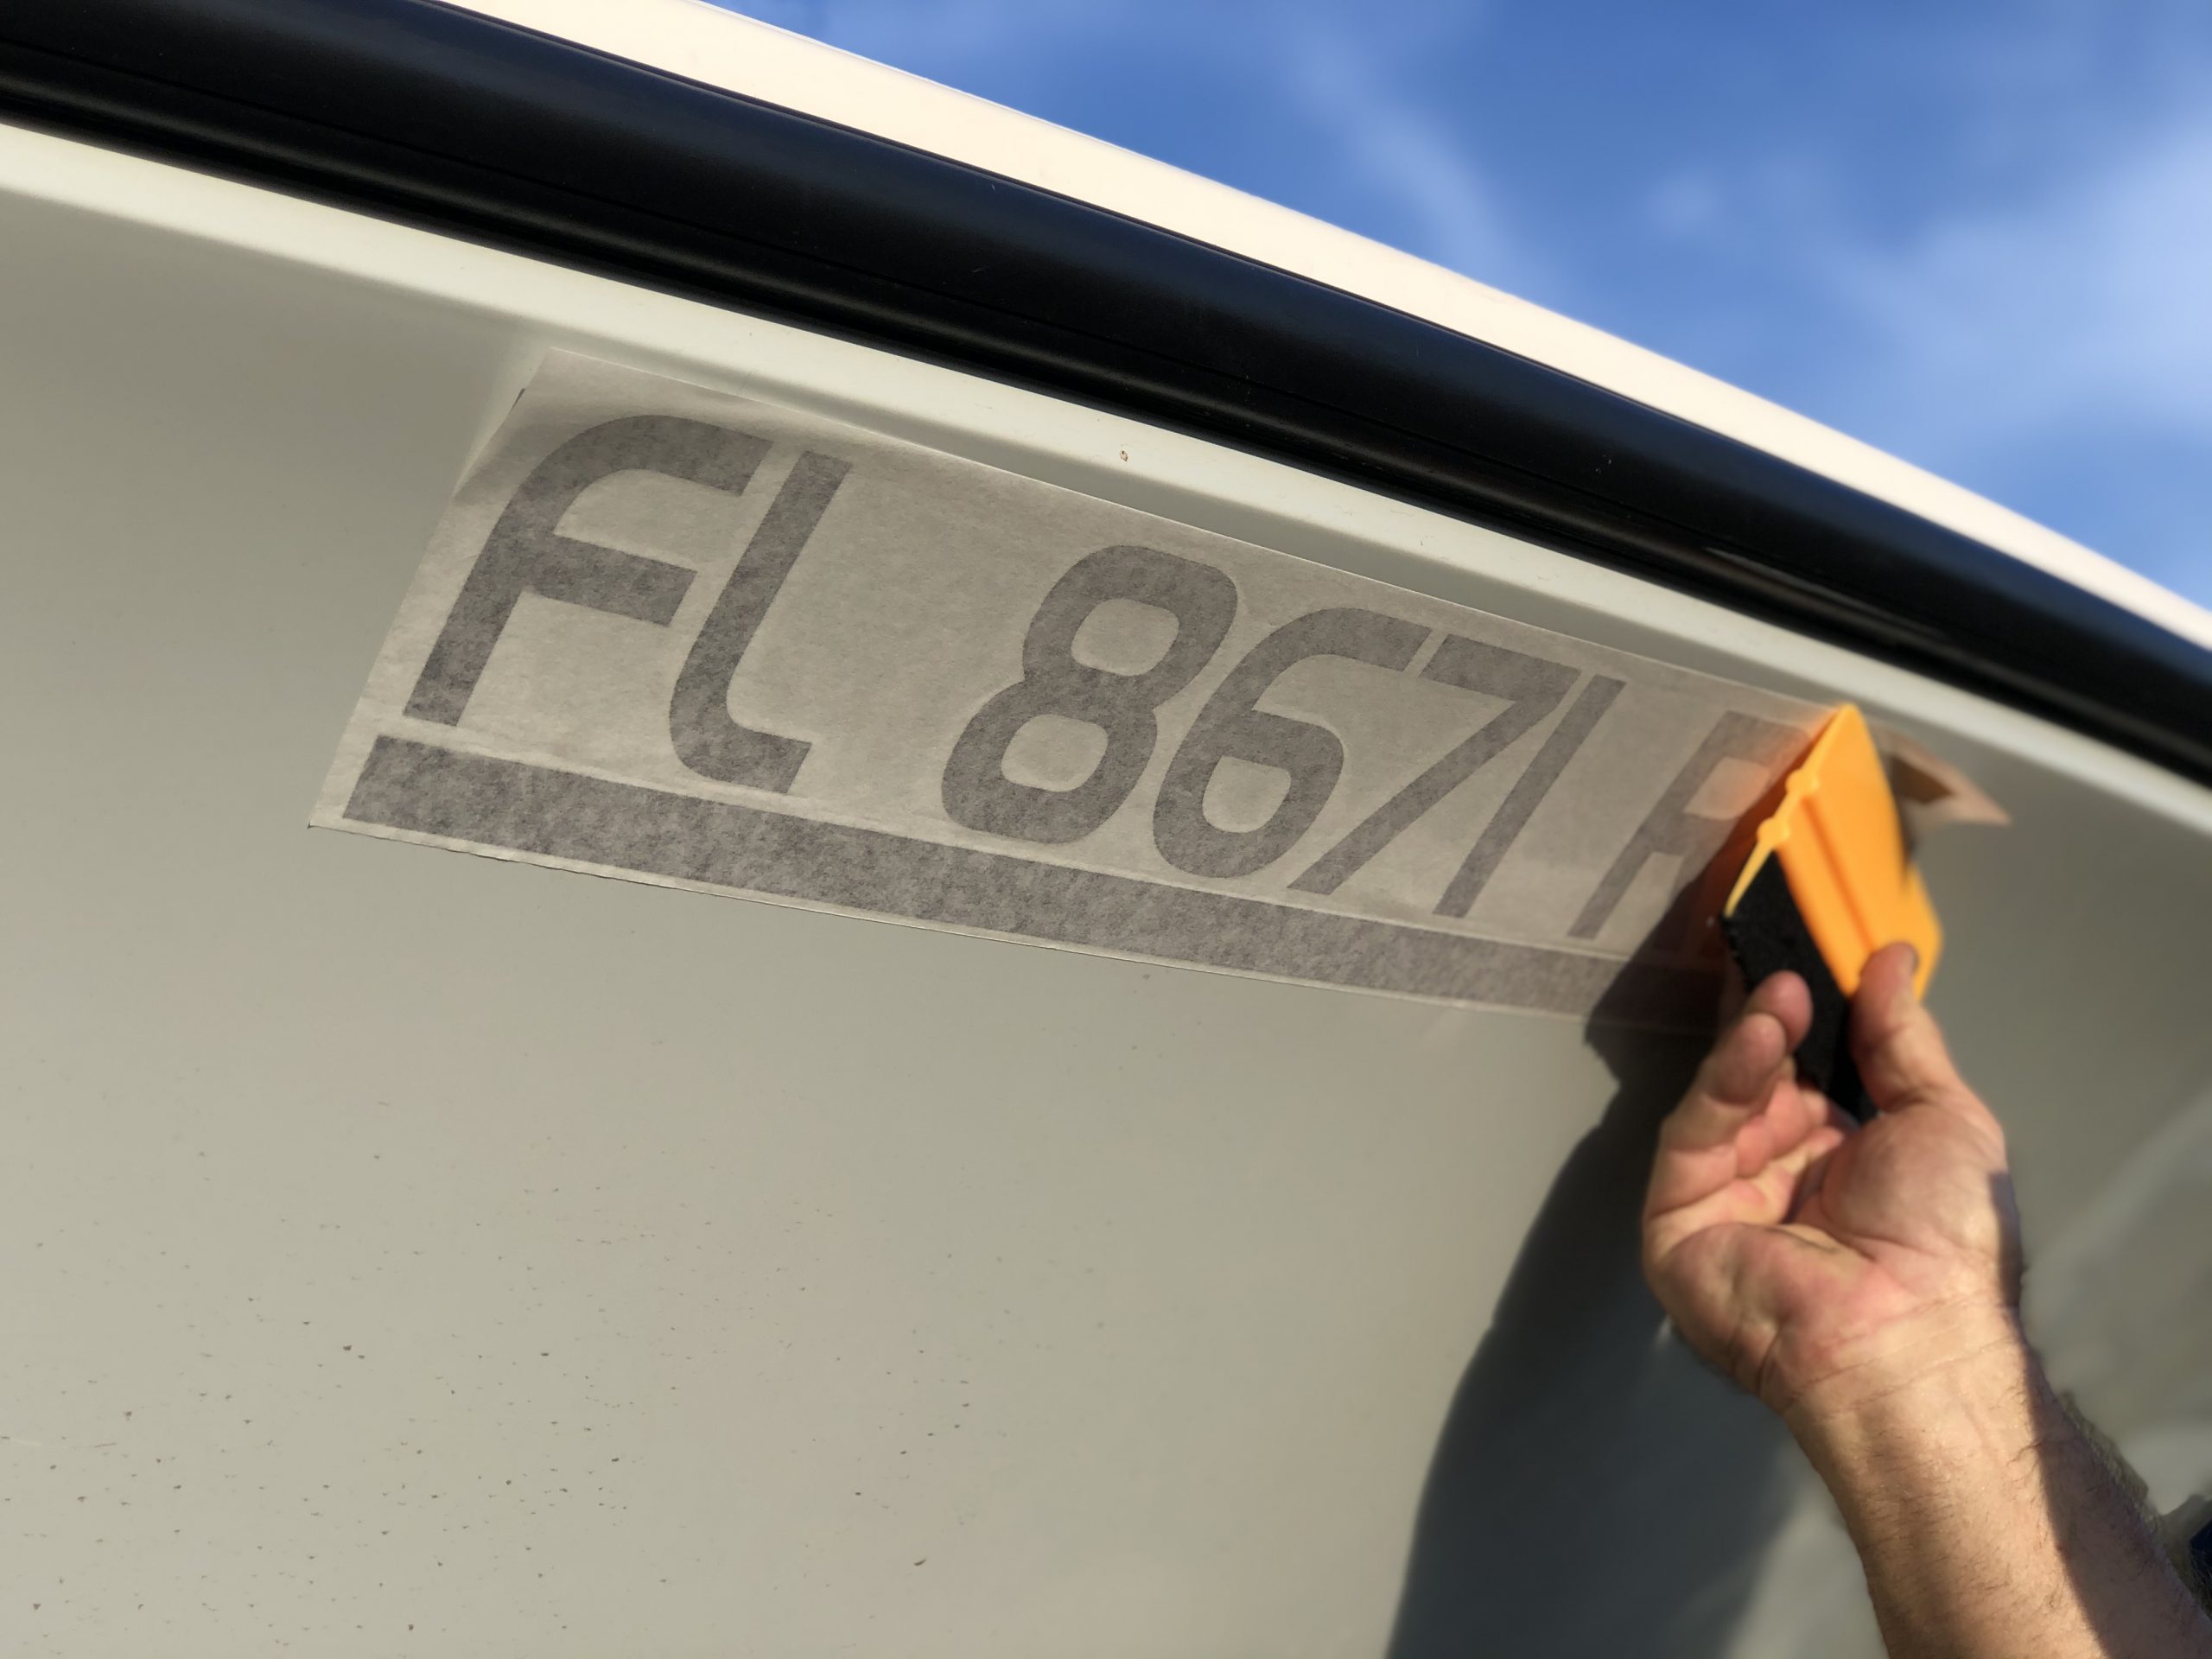 MarineReg squeegee affixing vessel registration numbers on boat